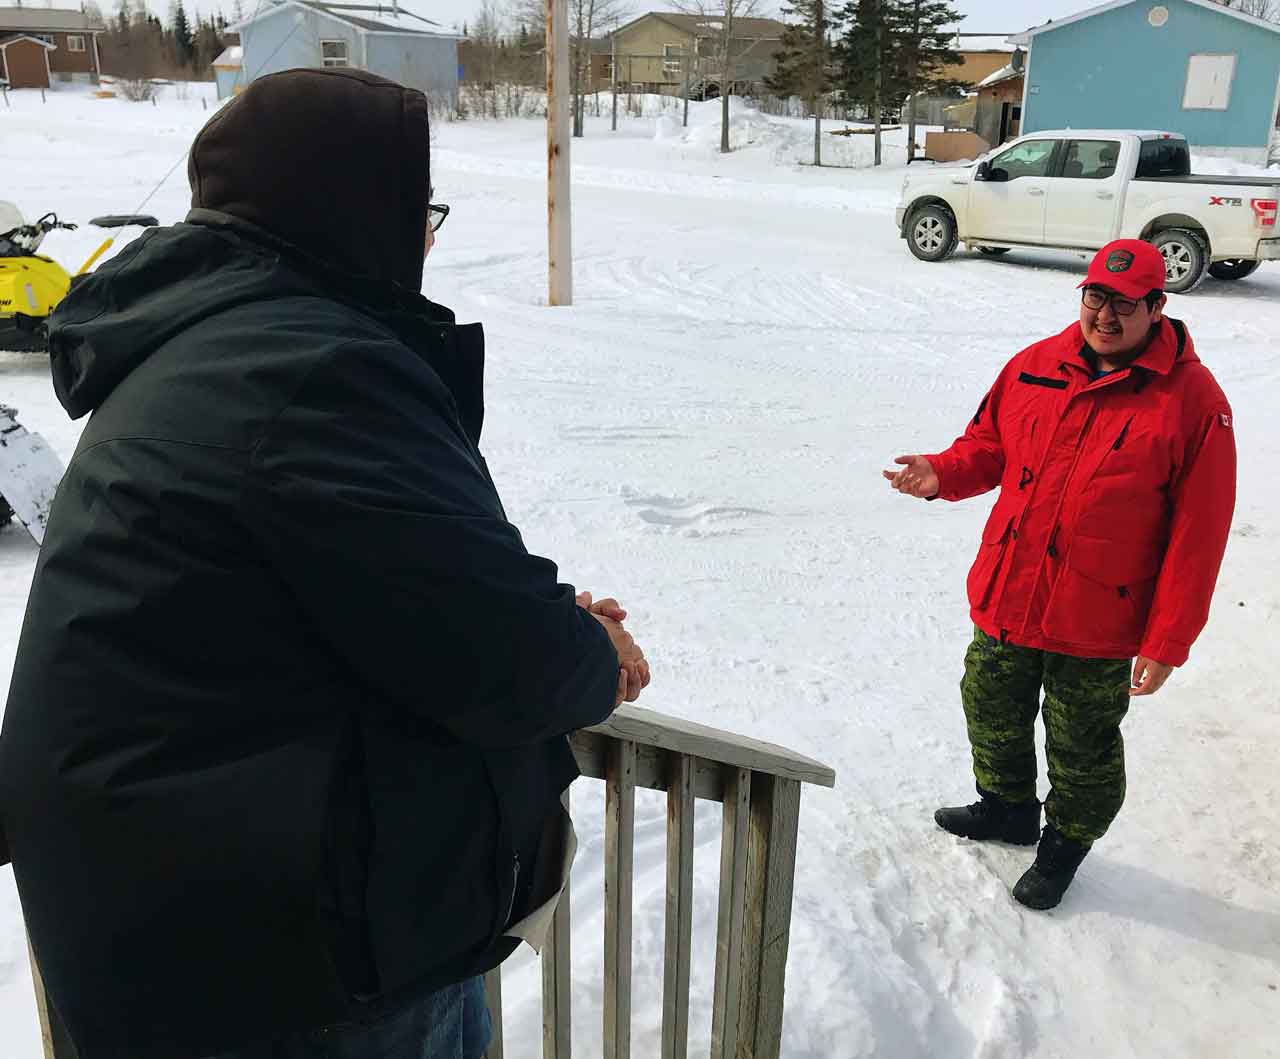 Ranger Joseph Hunter conducts a wellness check with a resident of Peawanuck. Photo credit: Master Corporal Jason Hunter, Canadian Rangers